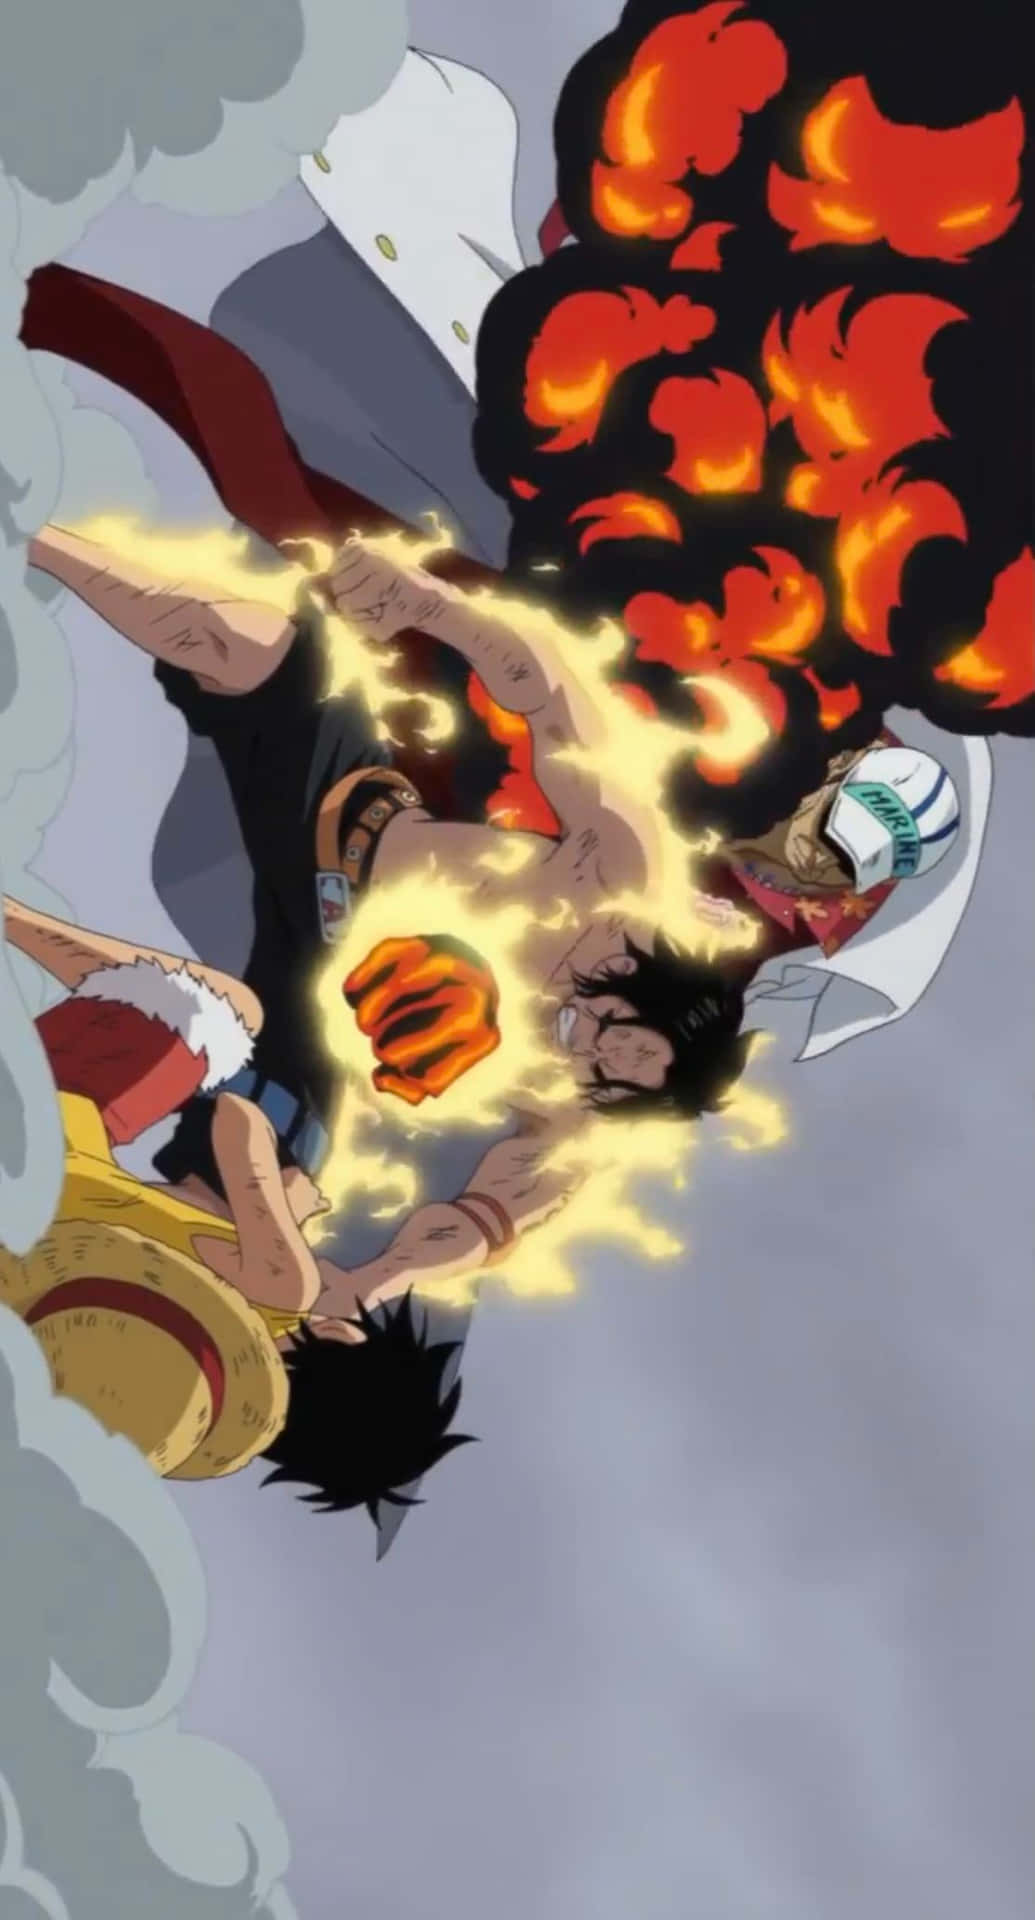 2560x1440px  free download  HD wallpaper One Piece Ace Death anime   Wallpaper Flare